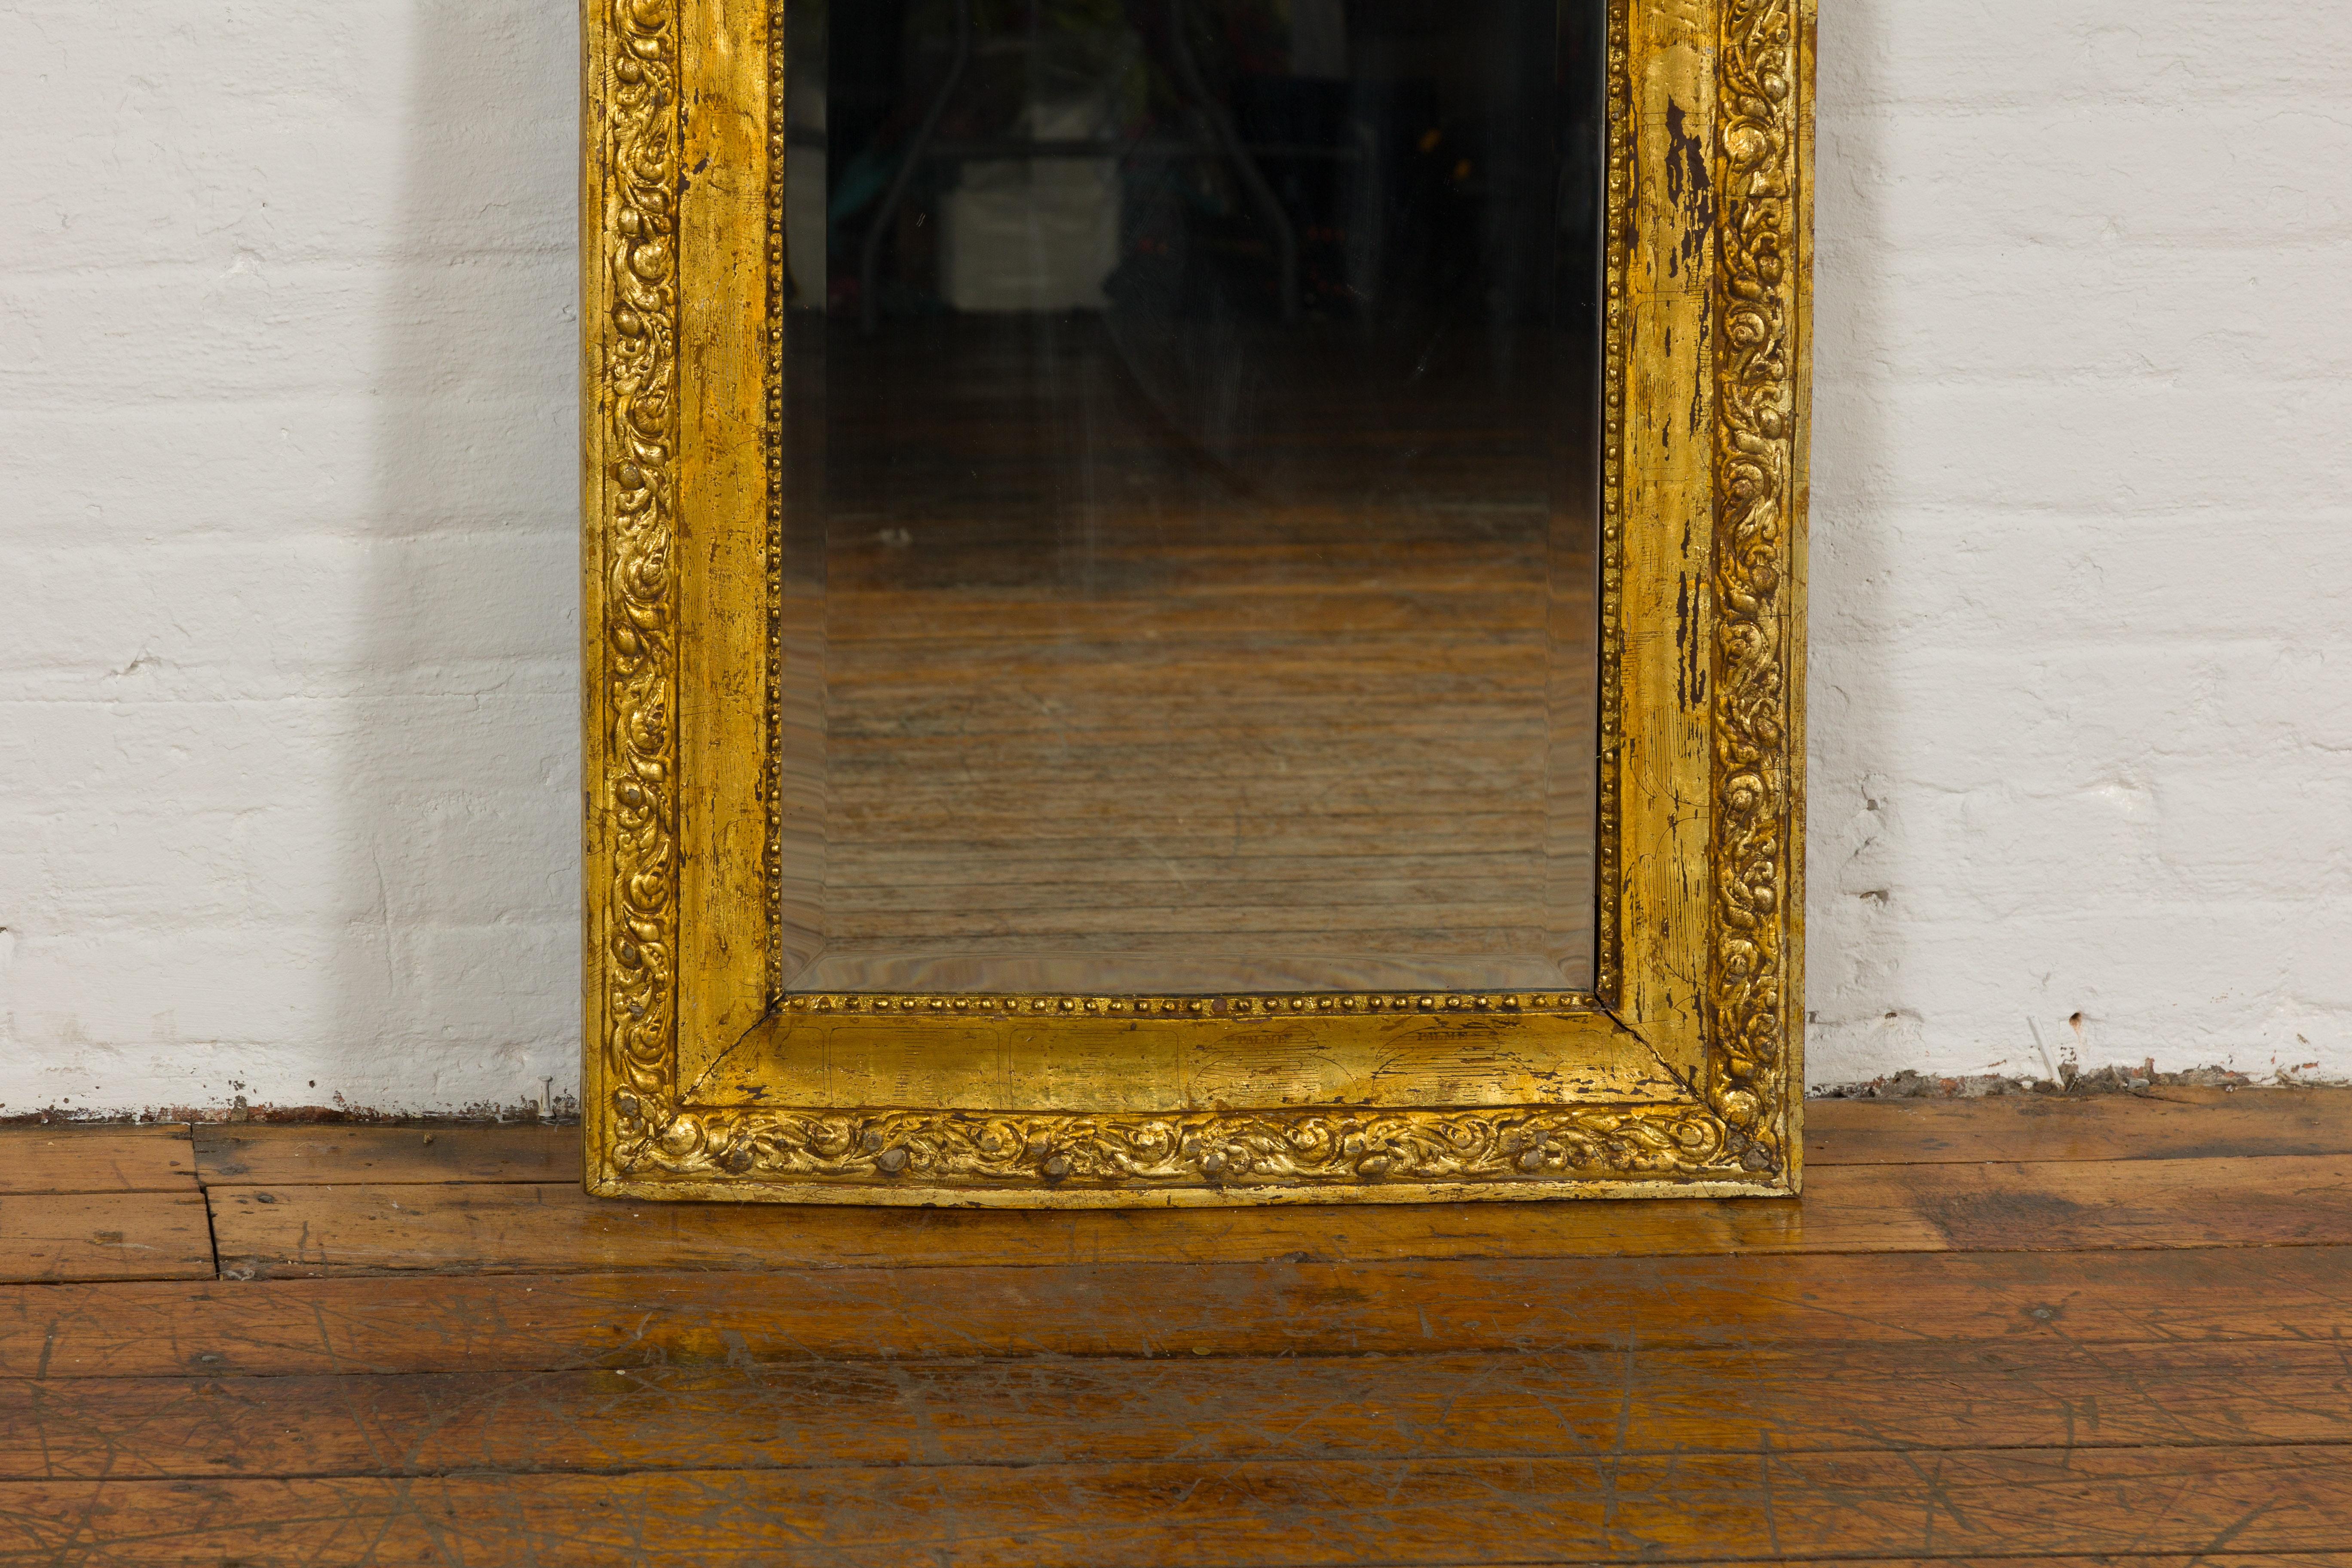 Dutch Colonial Vintage Giltwood Trumeau Mirror with Carved Scrollwork Motifs In Good Condition For Sale In Yonkers, NY